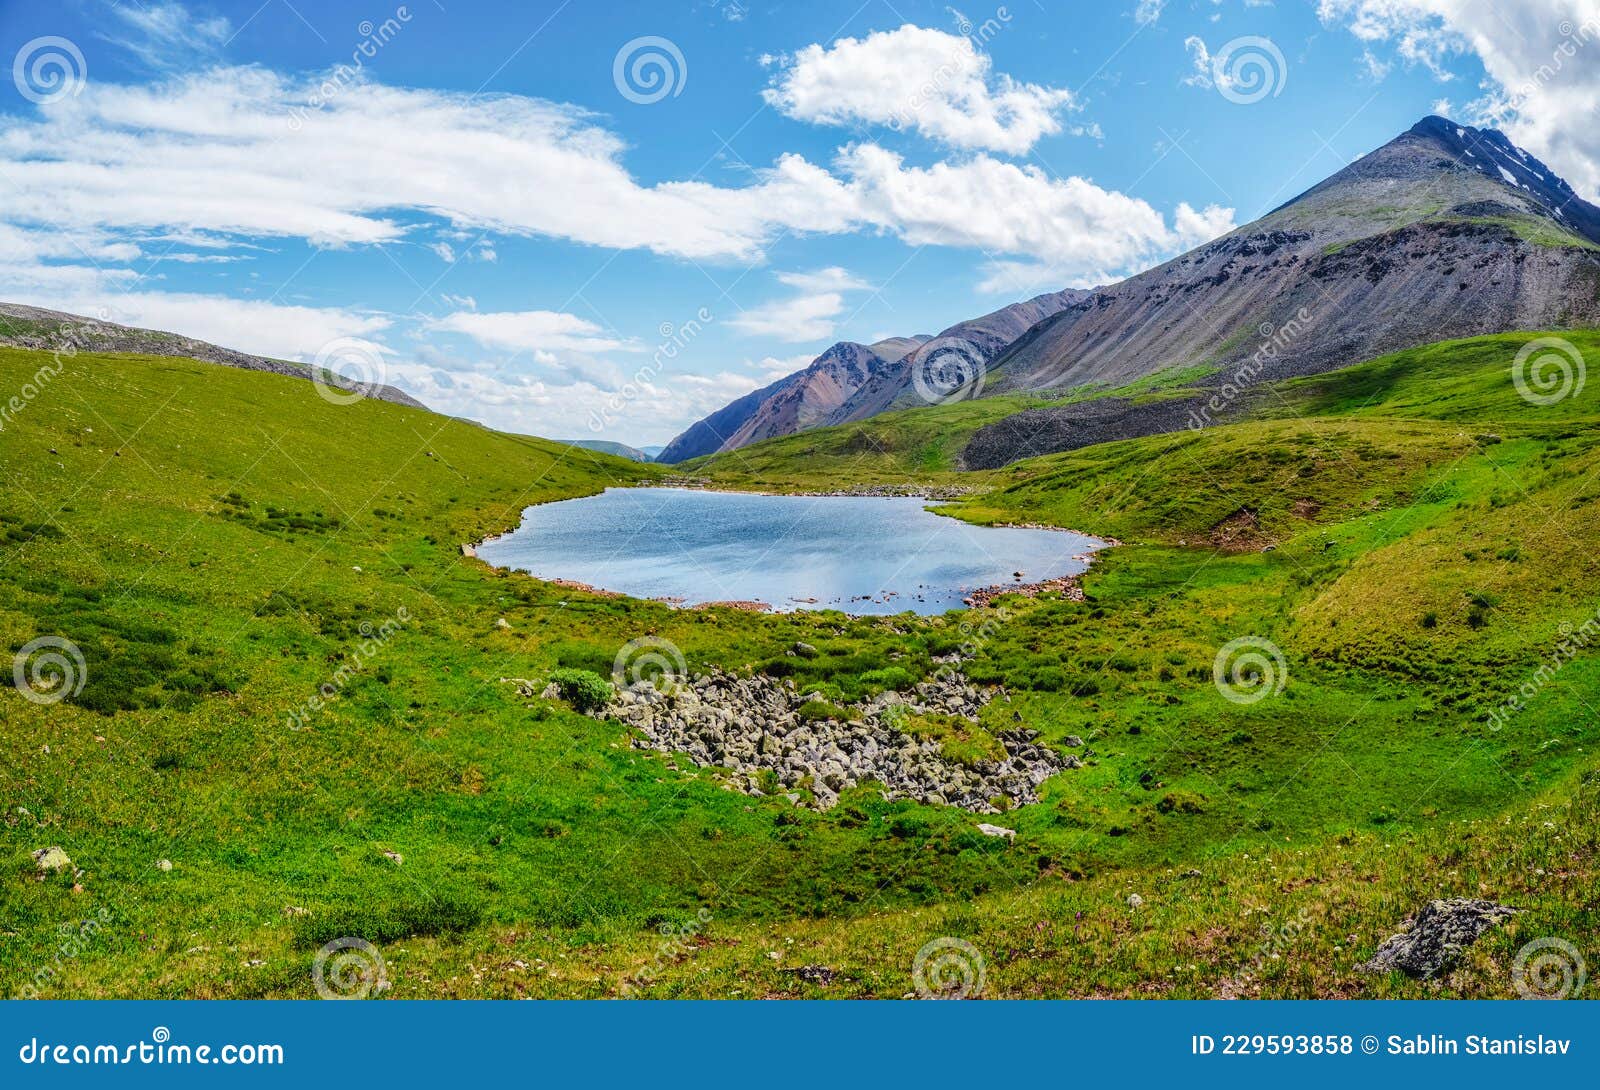 Bright Green Blue Alpine Landscape With Mountain Lake In Highland